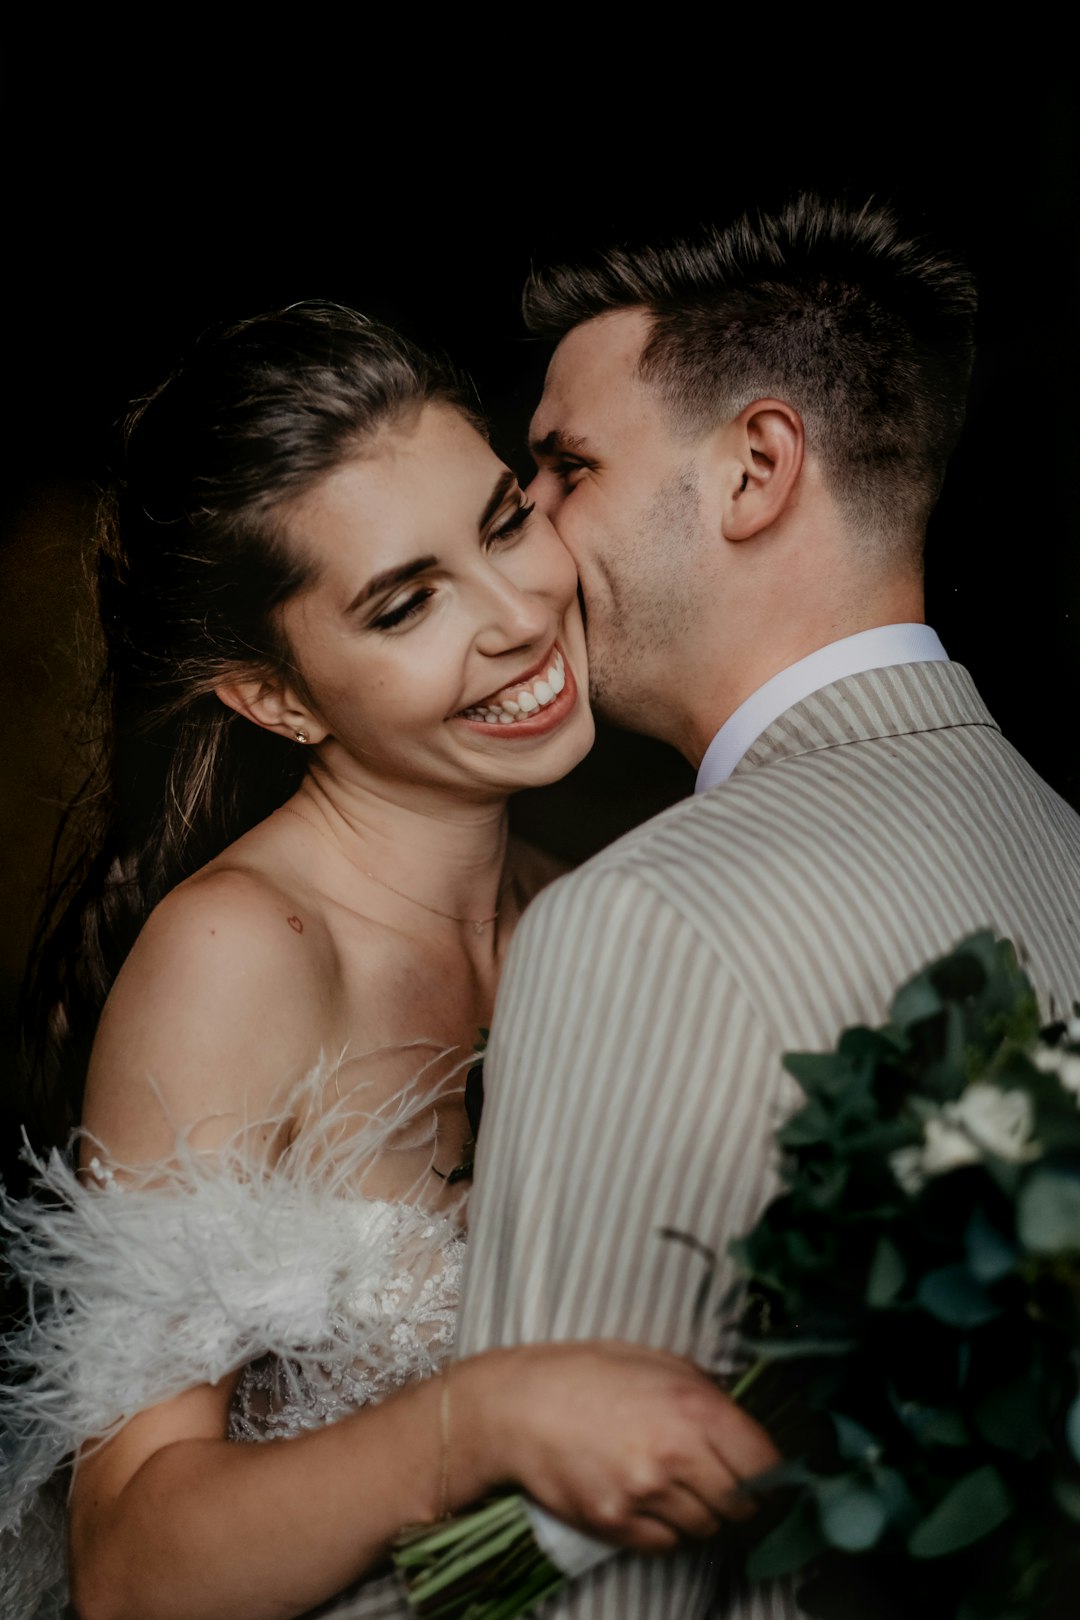 man in gray suit kissing woman in white wedding dress